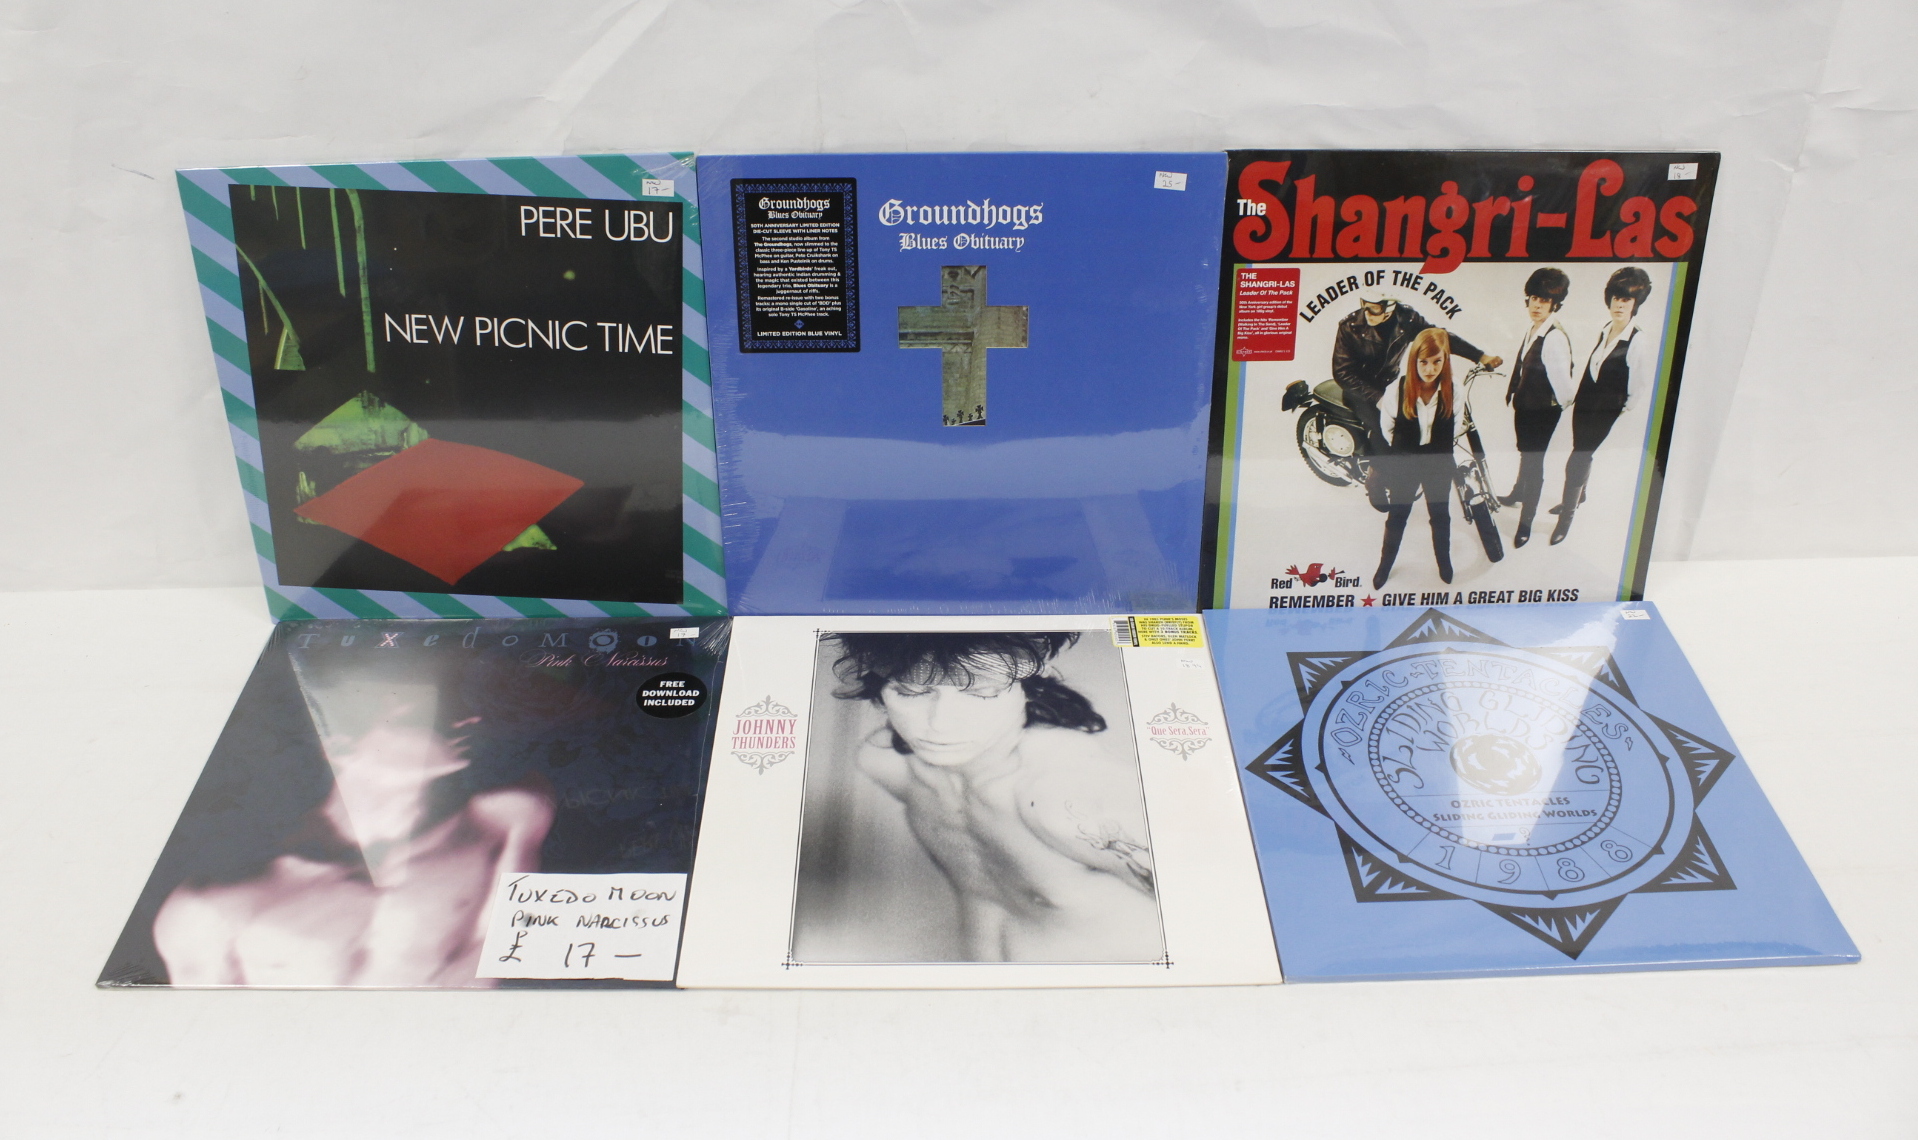 Sealed albums to include Pere Ubu, Groundhogs, Johnny Thunders, etc.